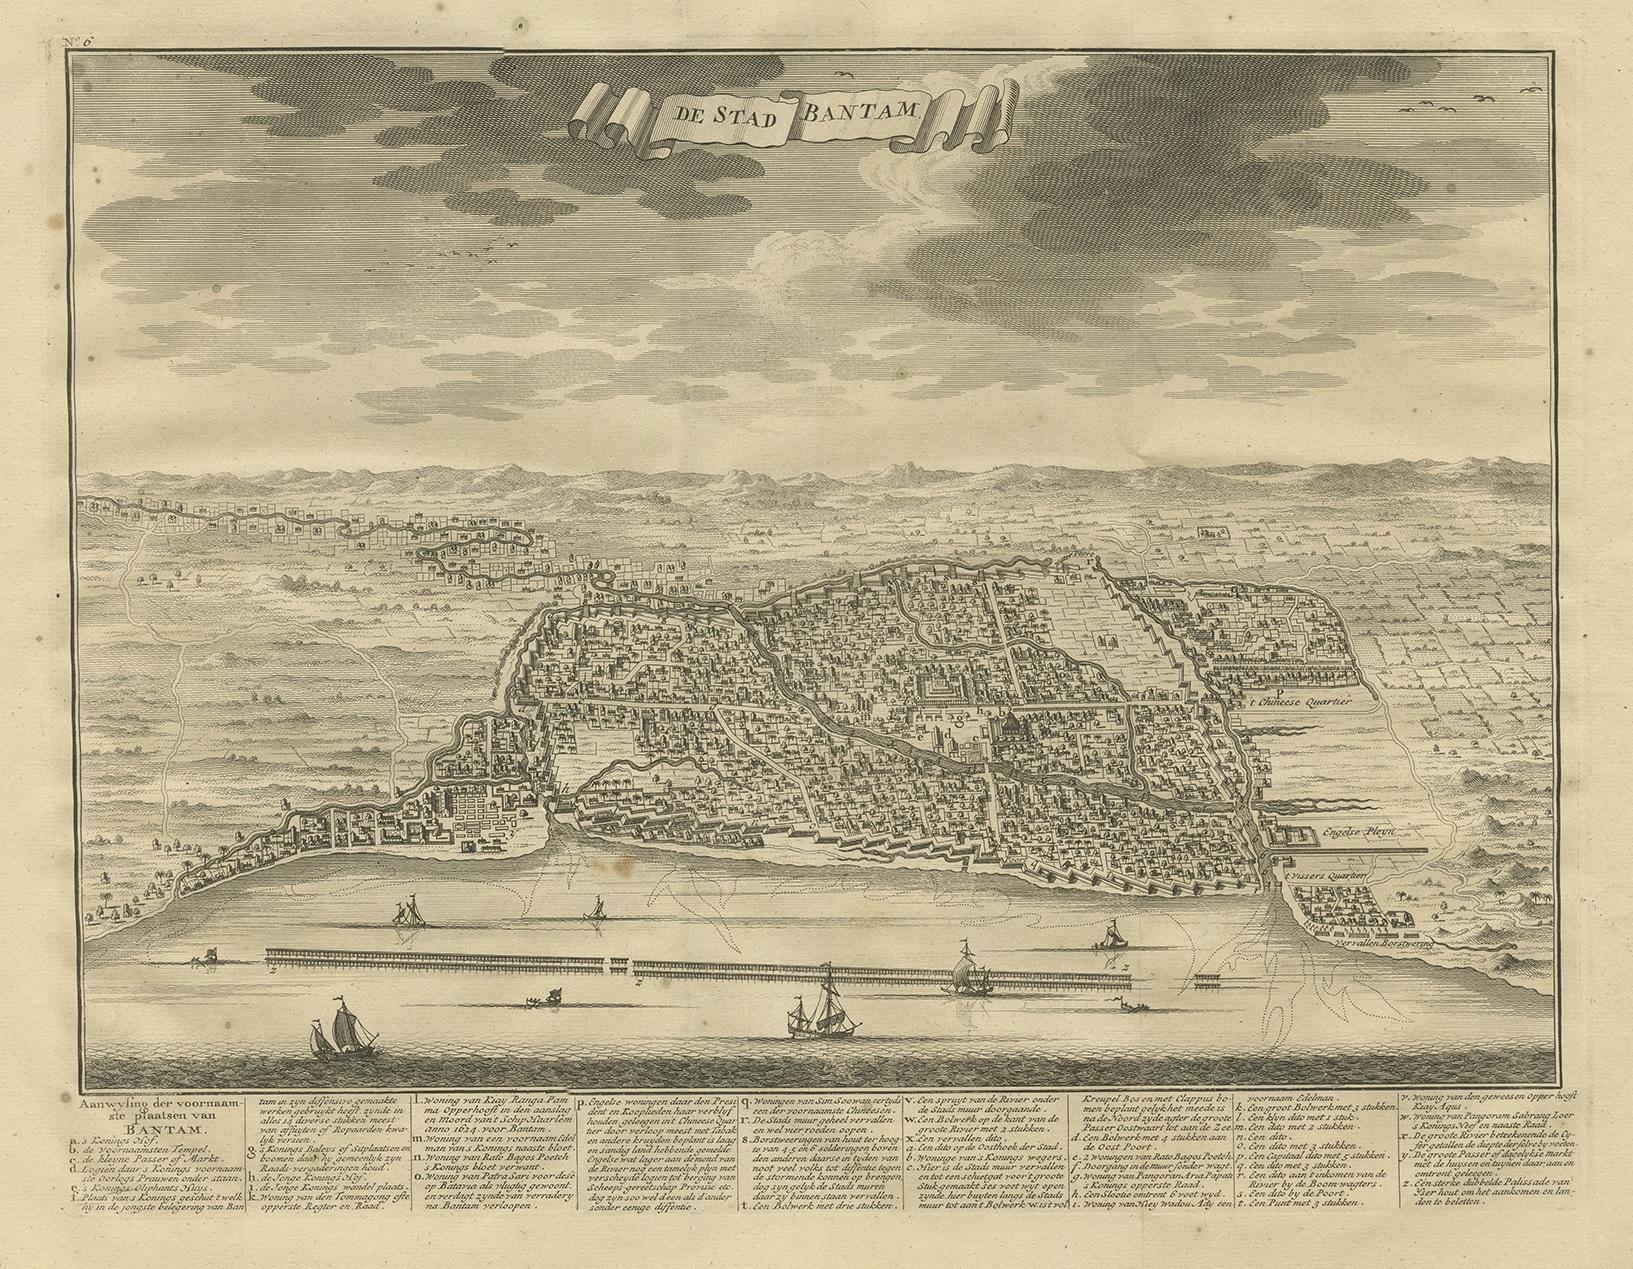 Antique print titled 'De Stad Bantam'. Decorative town-view of the town of Bantam (Banten). In lower margin key a-z to the principal places in town. The Banten Sultanate was founded in the 16th century and centered in Banten, a port city on the